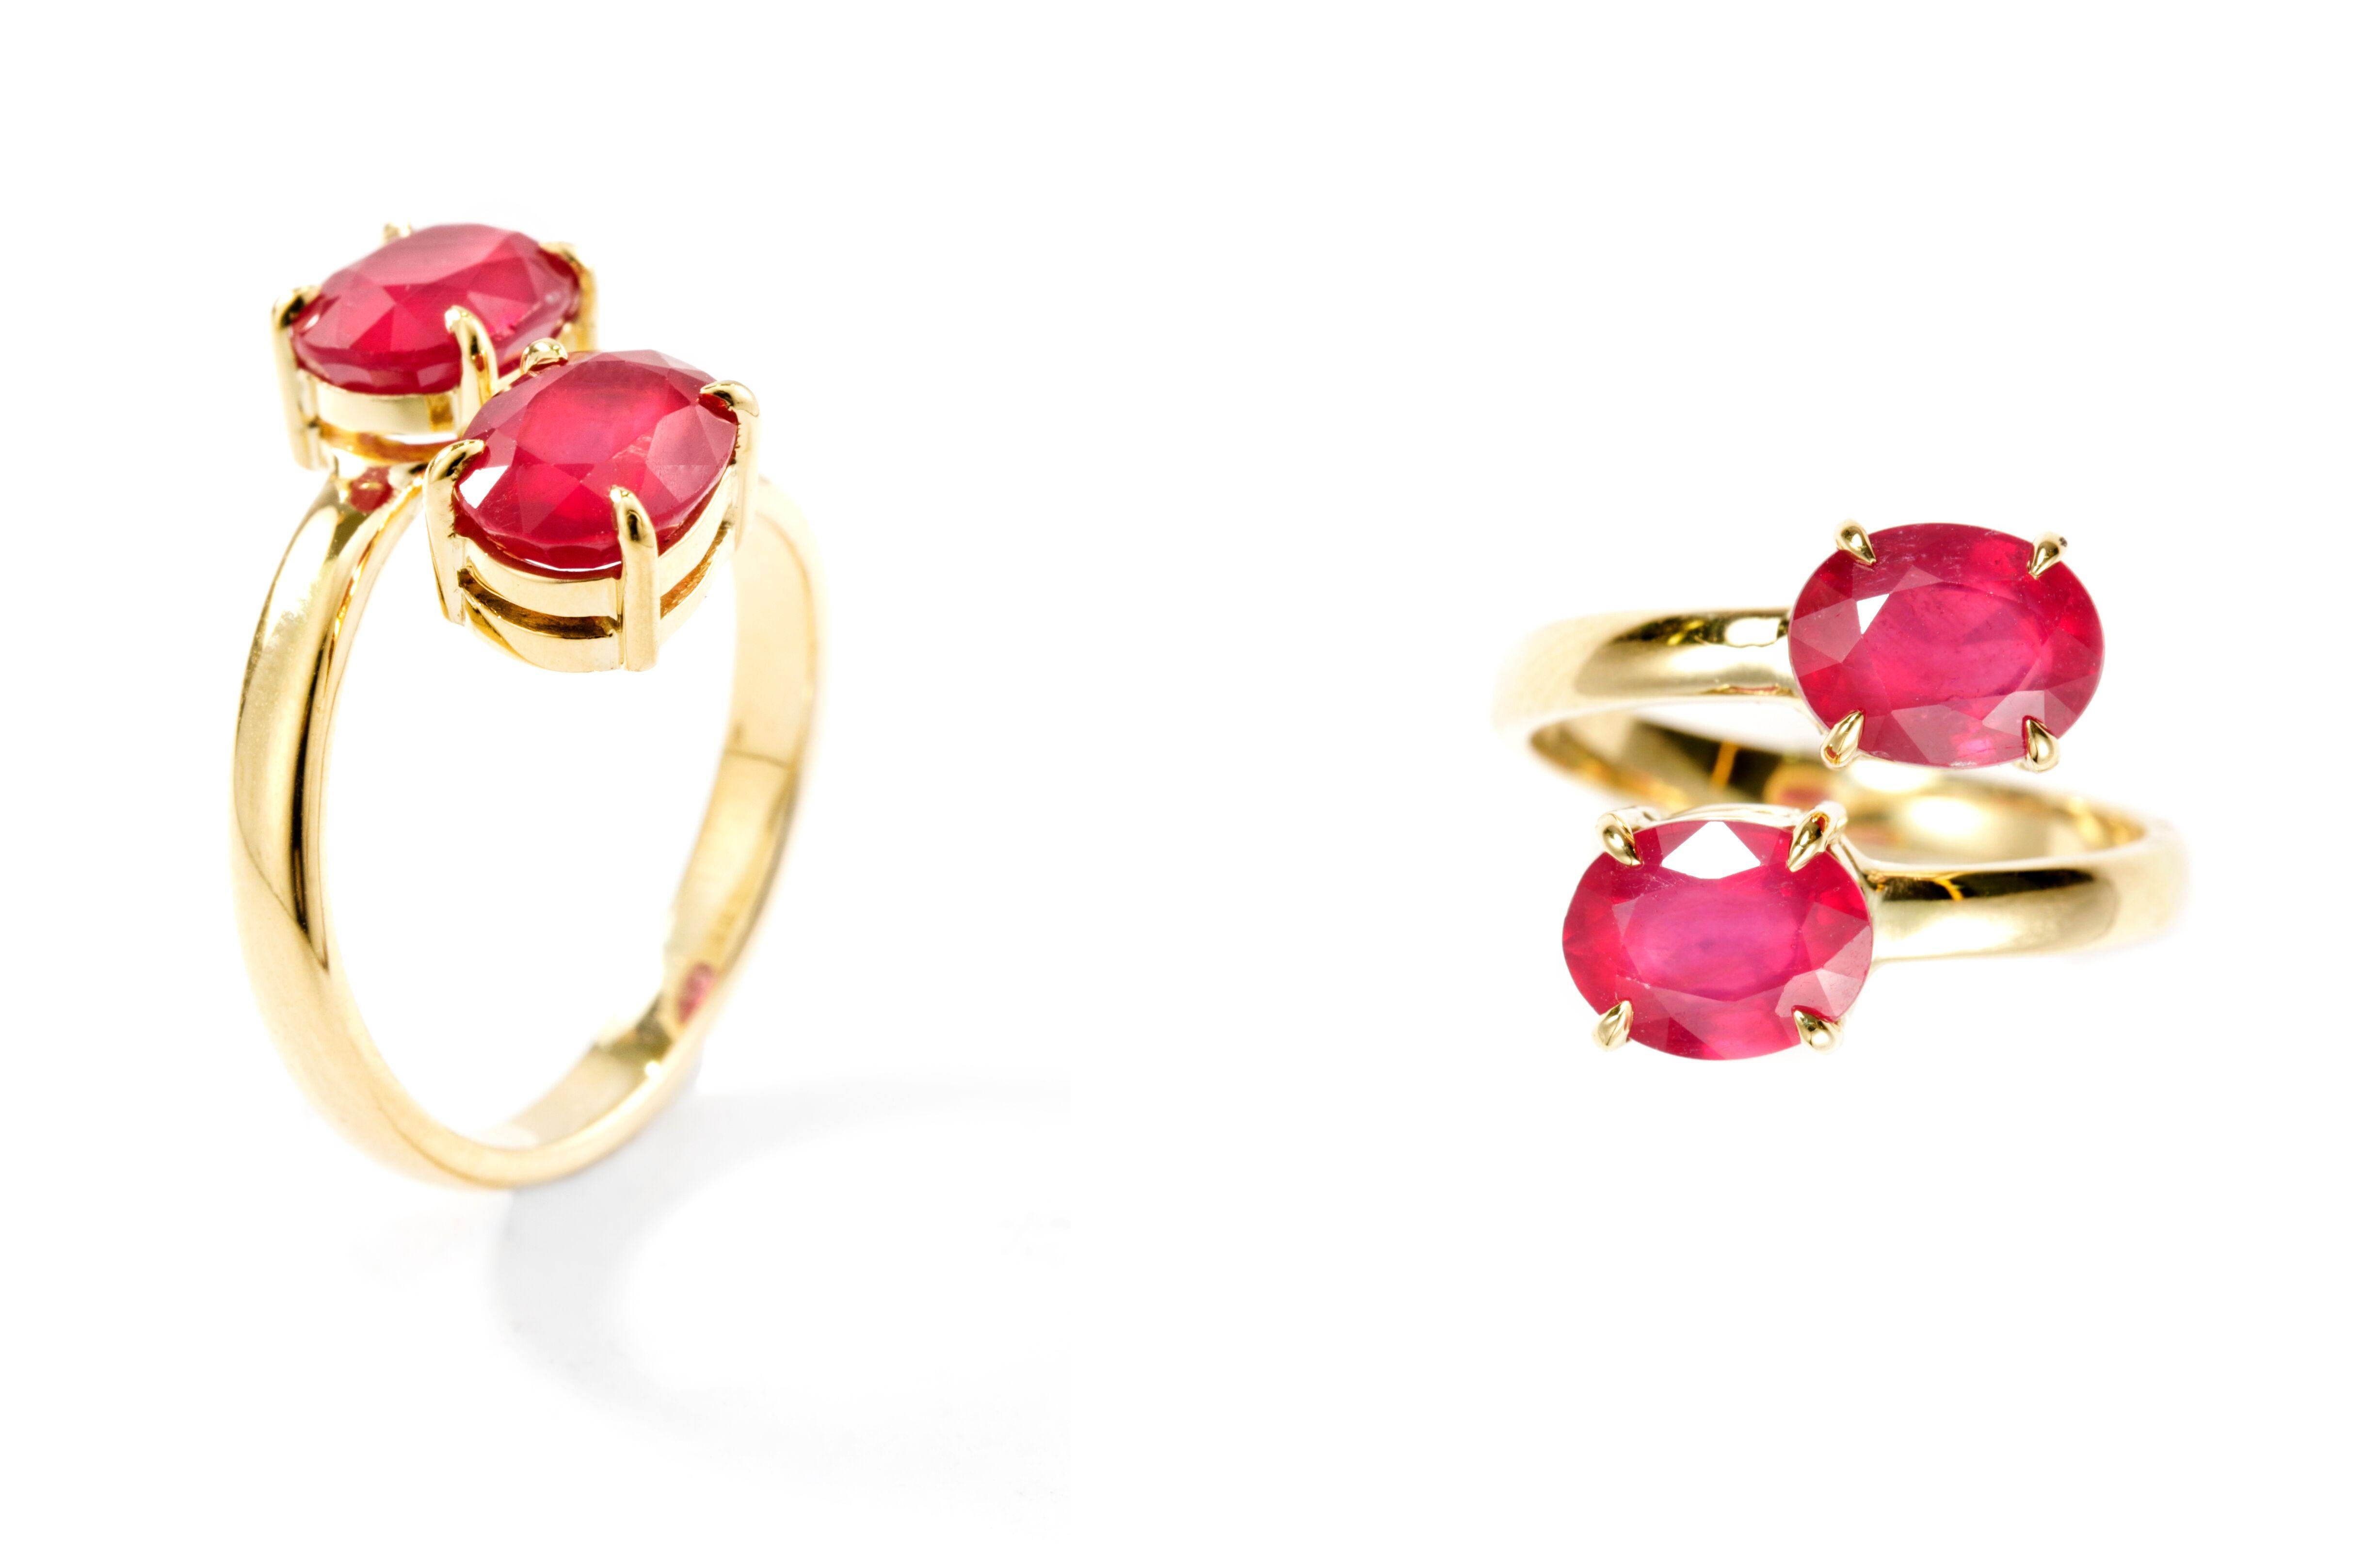 Designed exclusively by Ara Vartanian, this 18 Karat Yellow Gold open-style Ring features a pair of oval faceted 3.9 Carat Rubies.